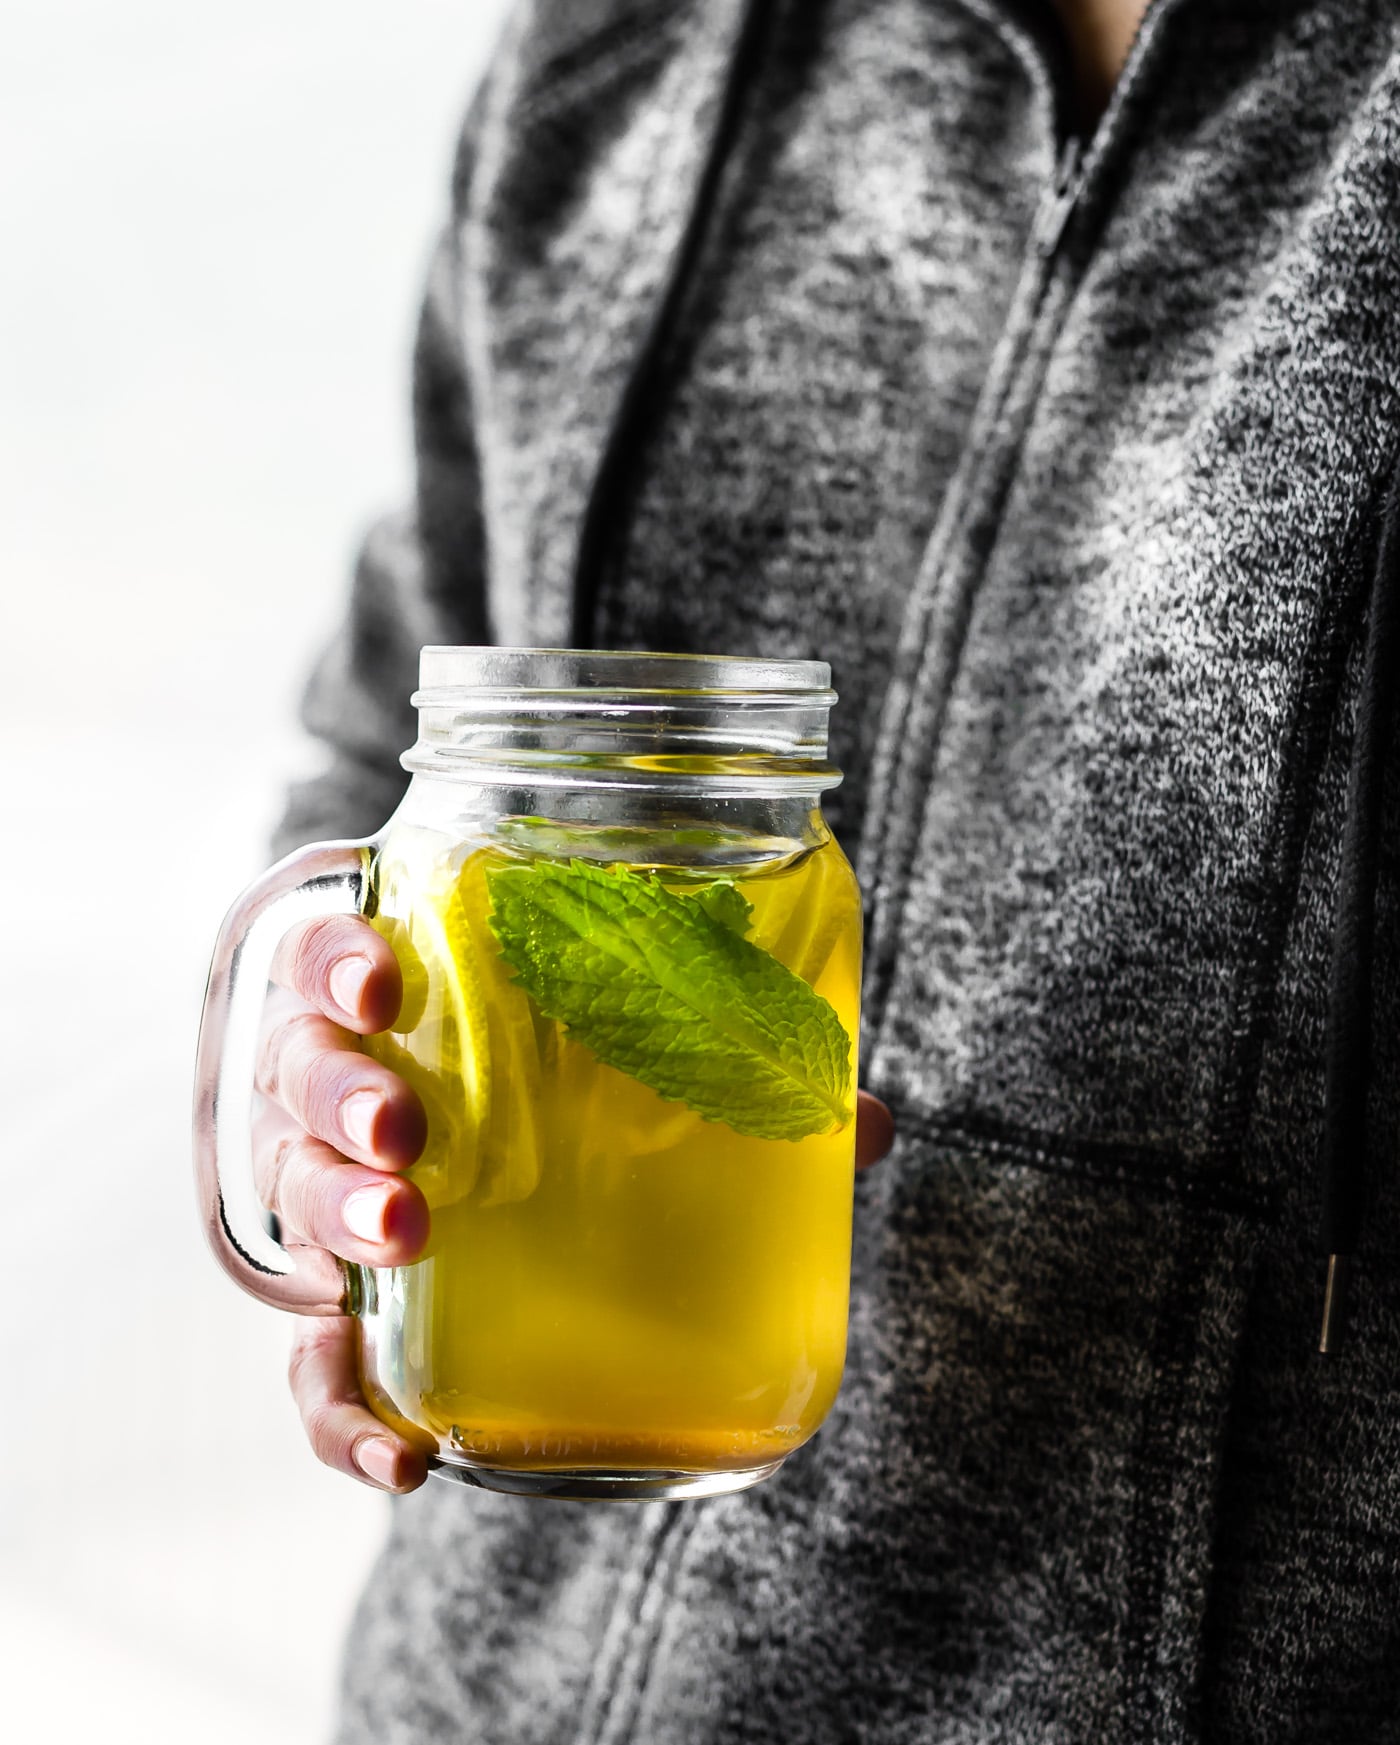 This Turmeric Ginger Lemonade with fresh Mint is great for fighting fatigue and reducing inflammation in the body. It's quick to make, naturally sweetened, and super refreshing! A homemade lemonade with a hint of spice, tartness, and Zing! Vegan, paleo, and AMAZING!